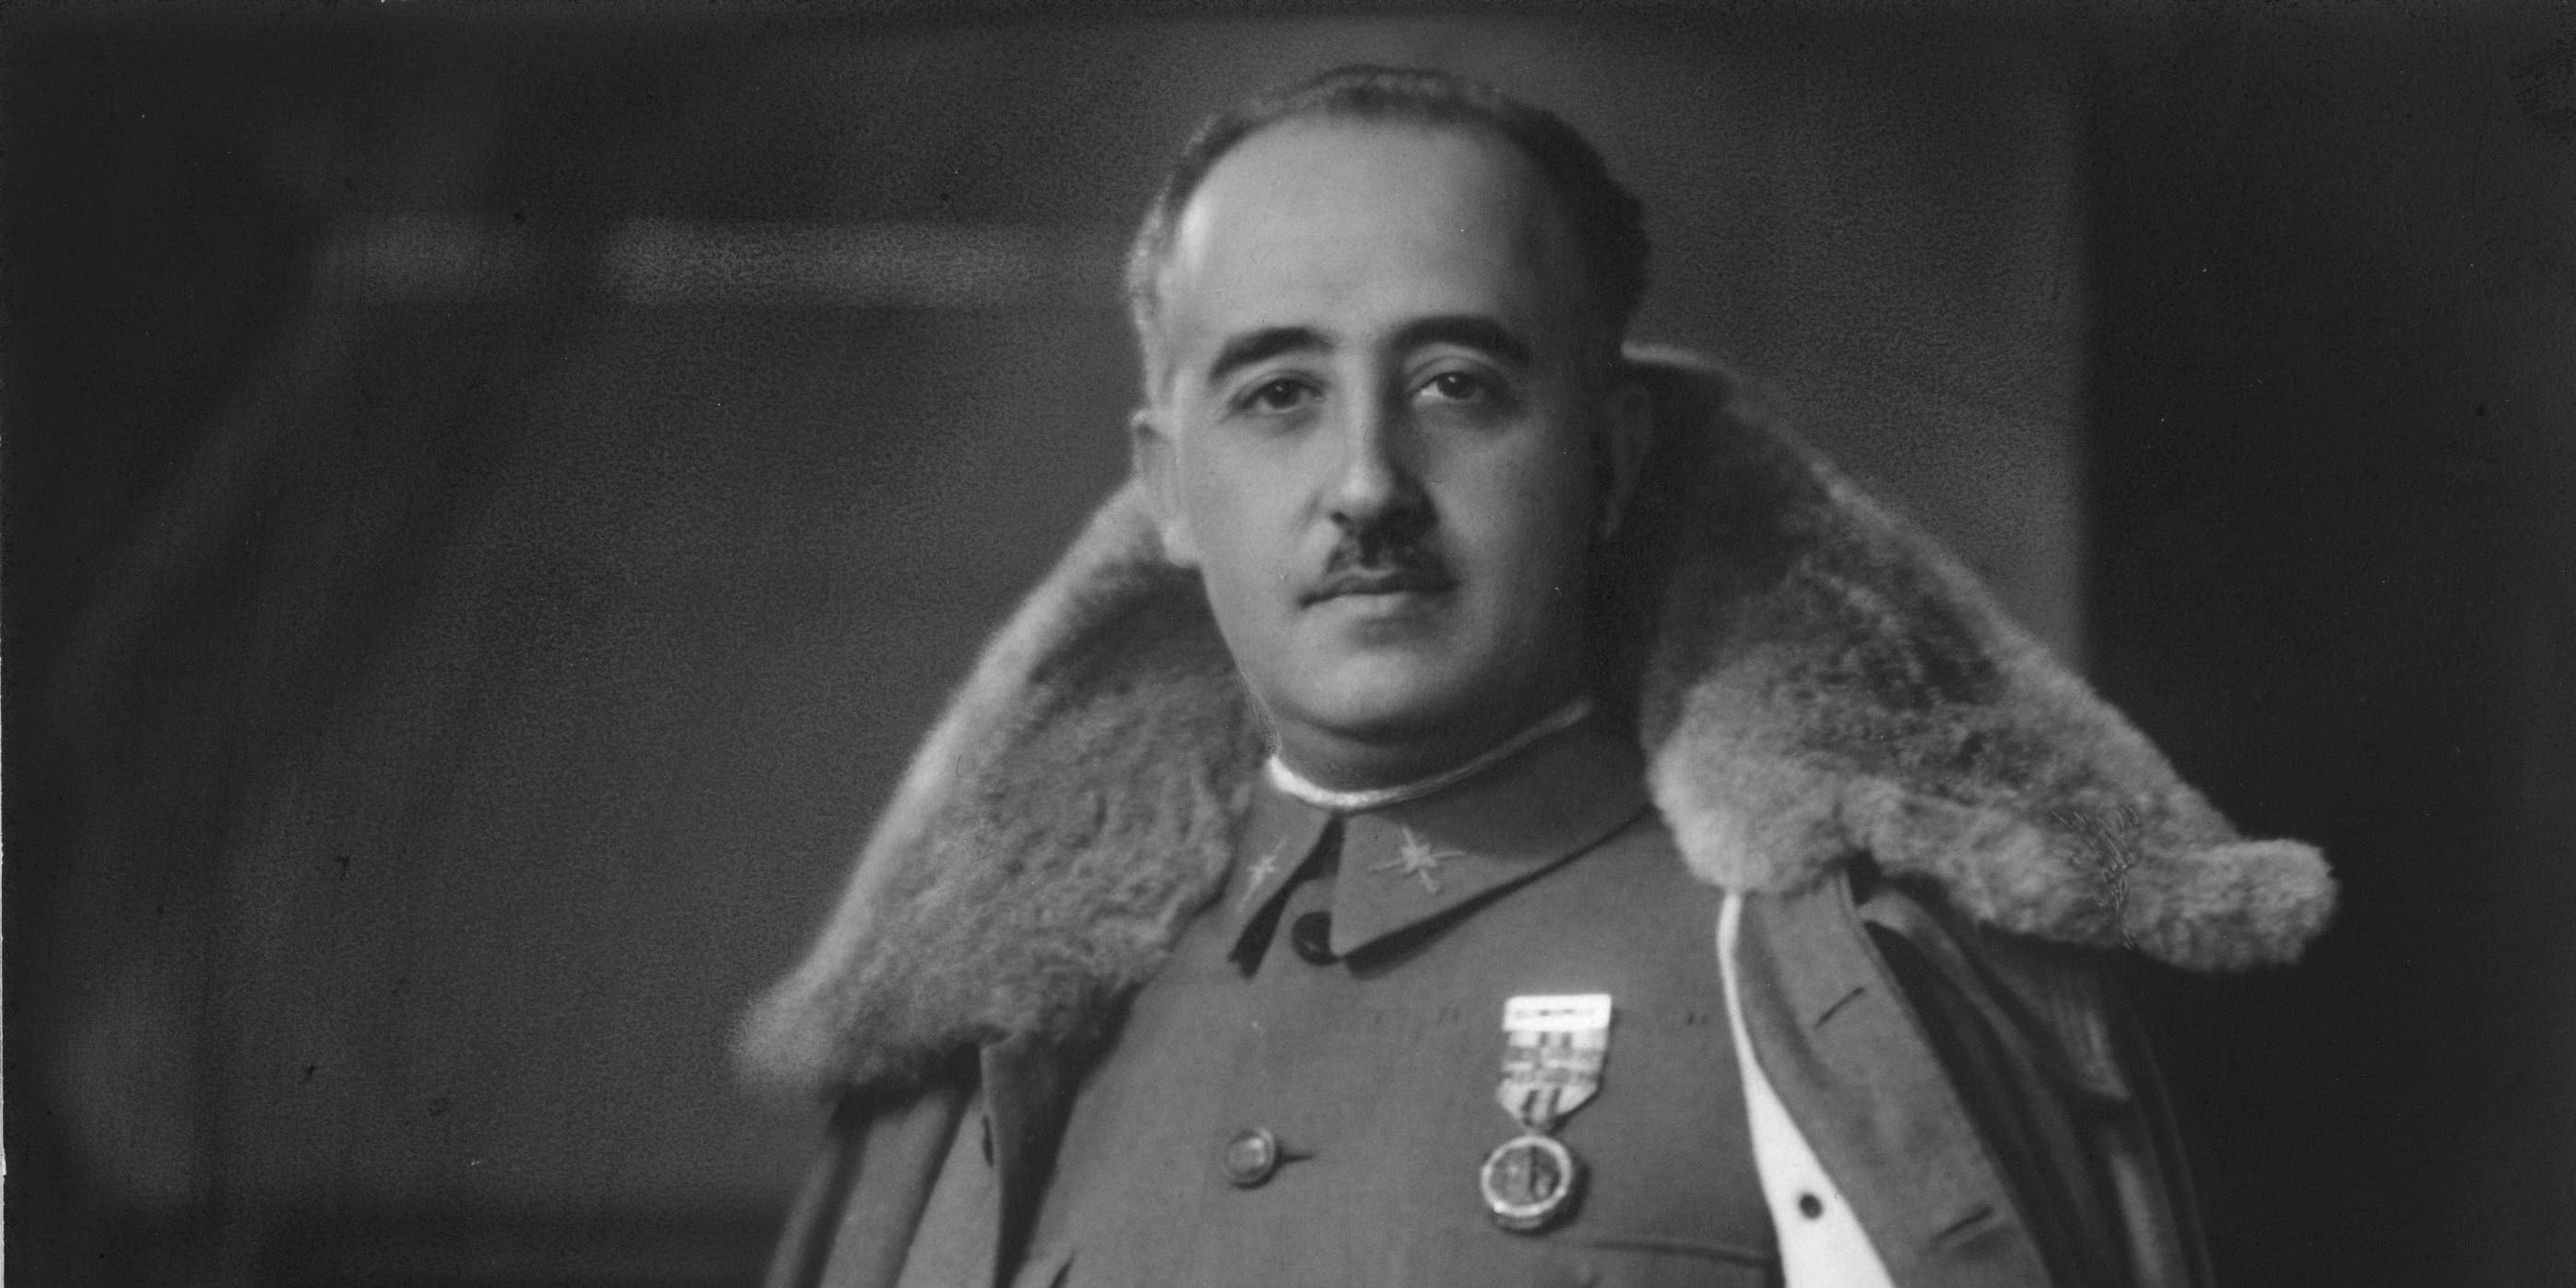 March 1938: Francisco Franco, Spanish general and dictator who governed Spain from 1939 to 1975.